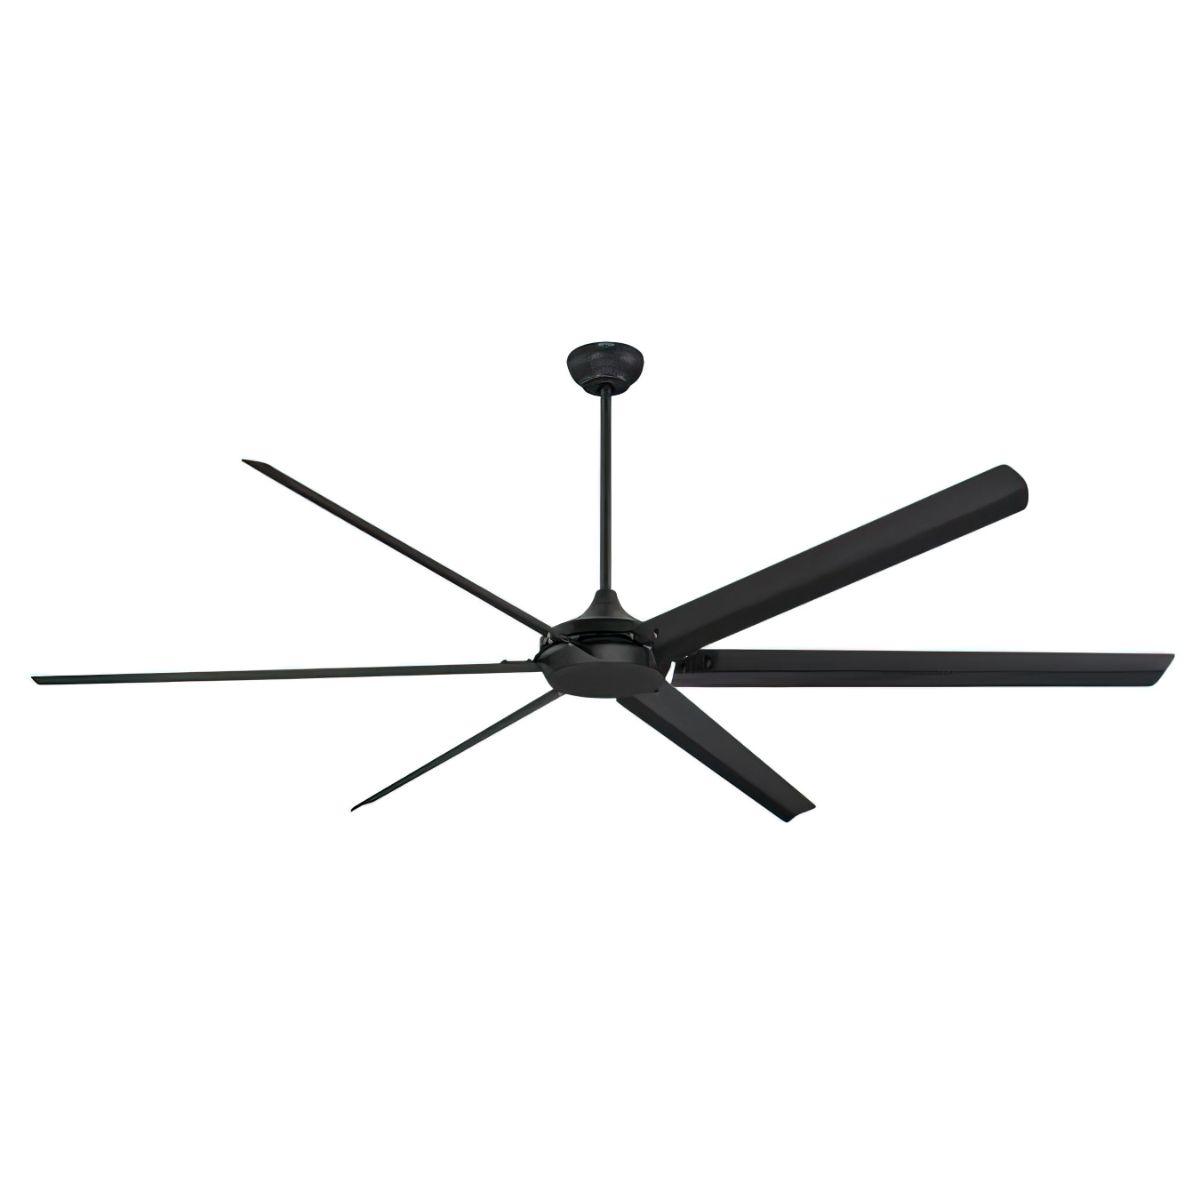 Widespan 100 Inch DC Industrial Windmill Outdoor Ceiling Fan With Remote, 6 Blades